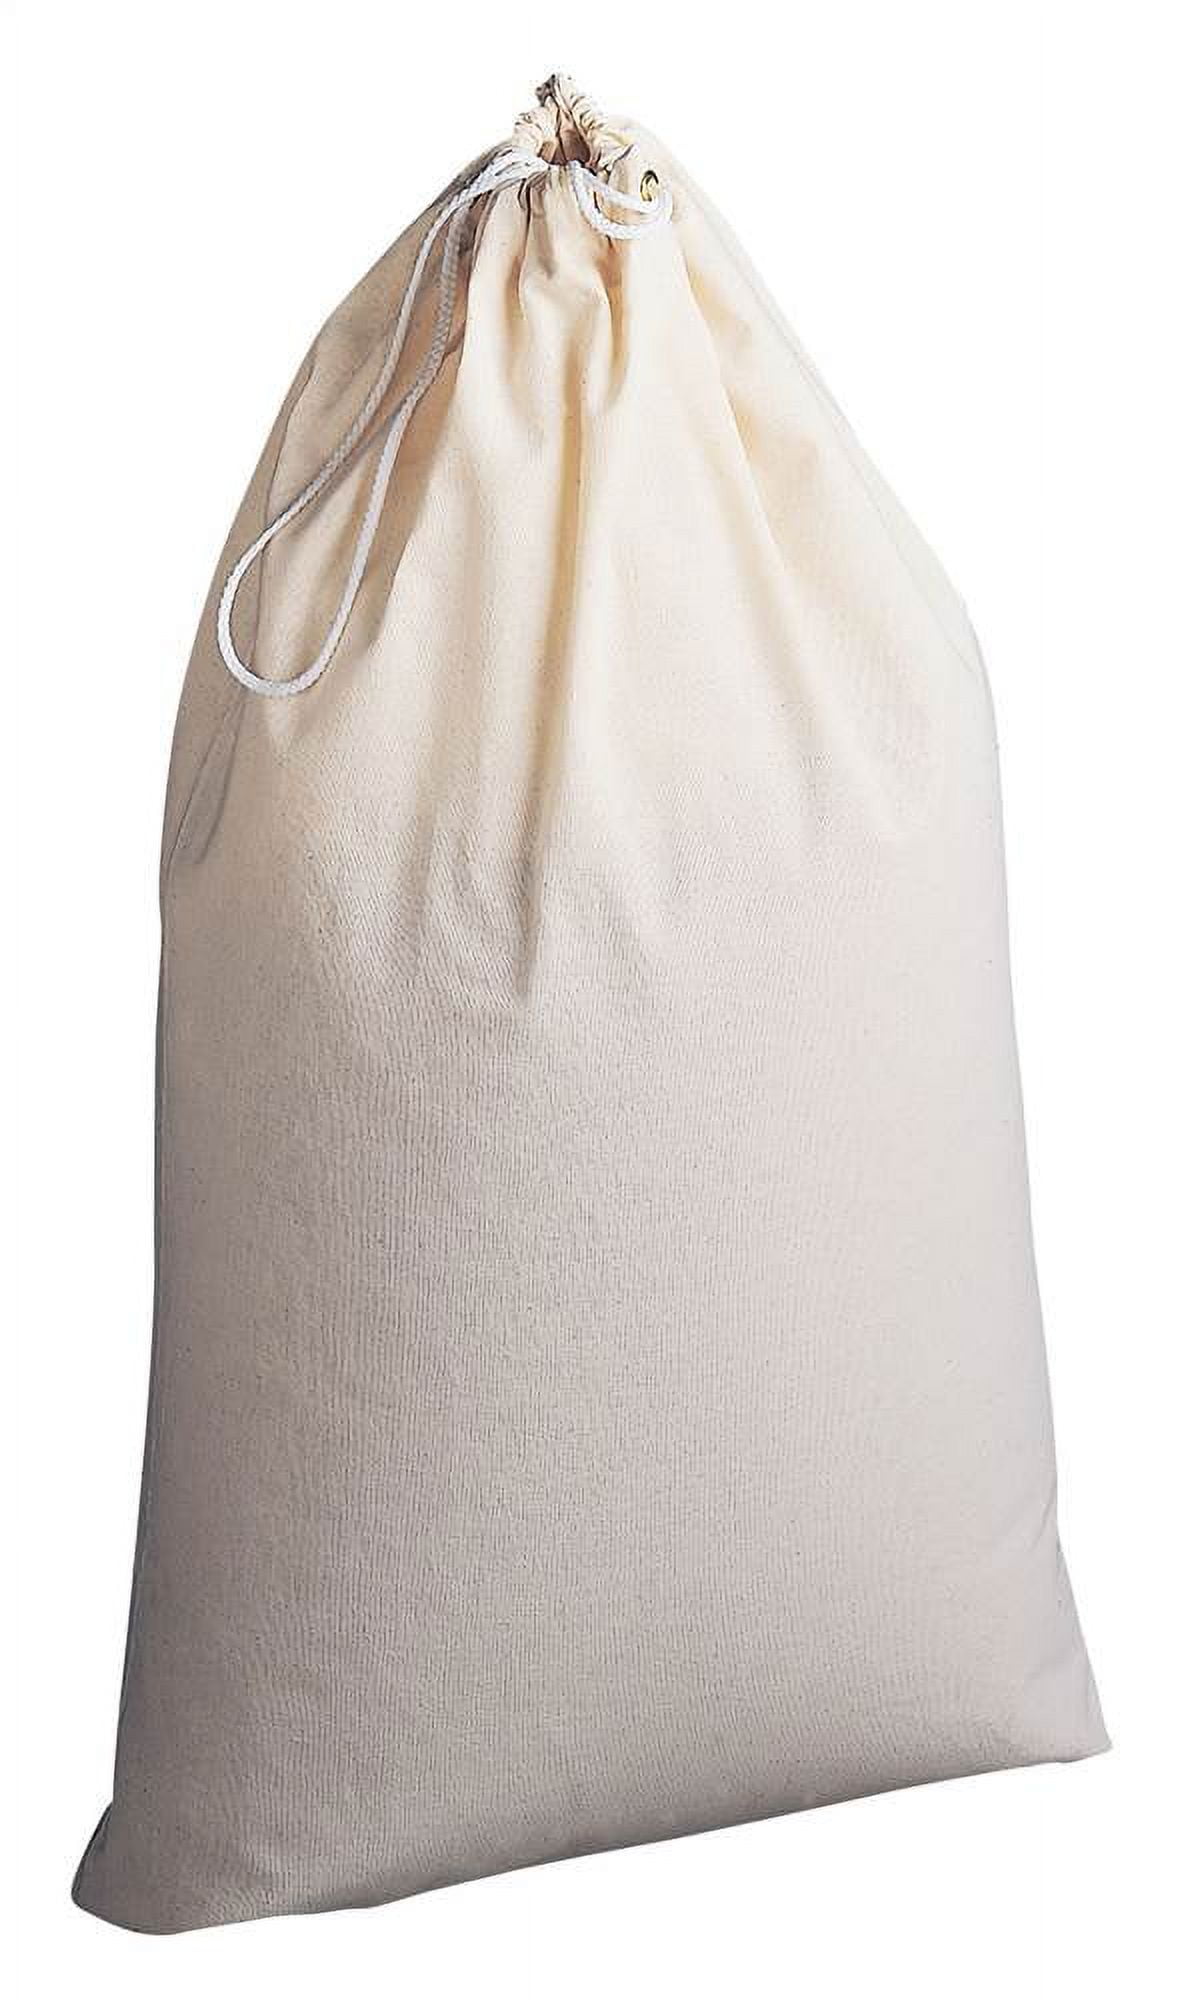 Household Essentials Extra Large Natural Cotton Laundry Bag, Beige